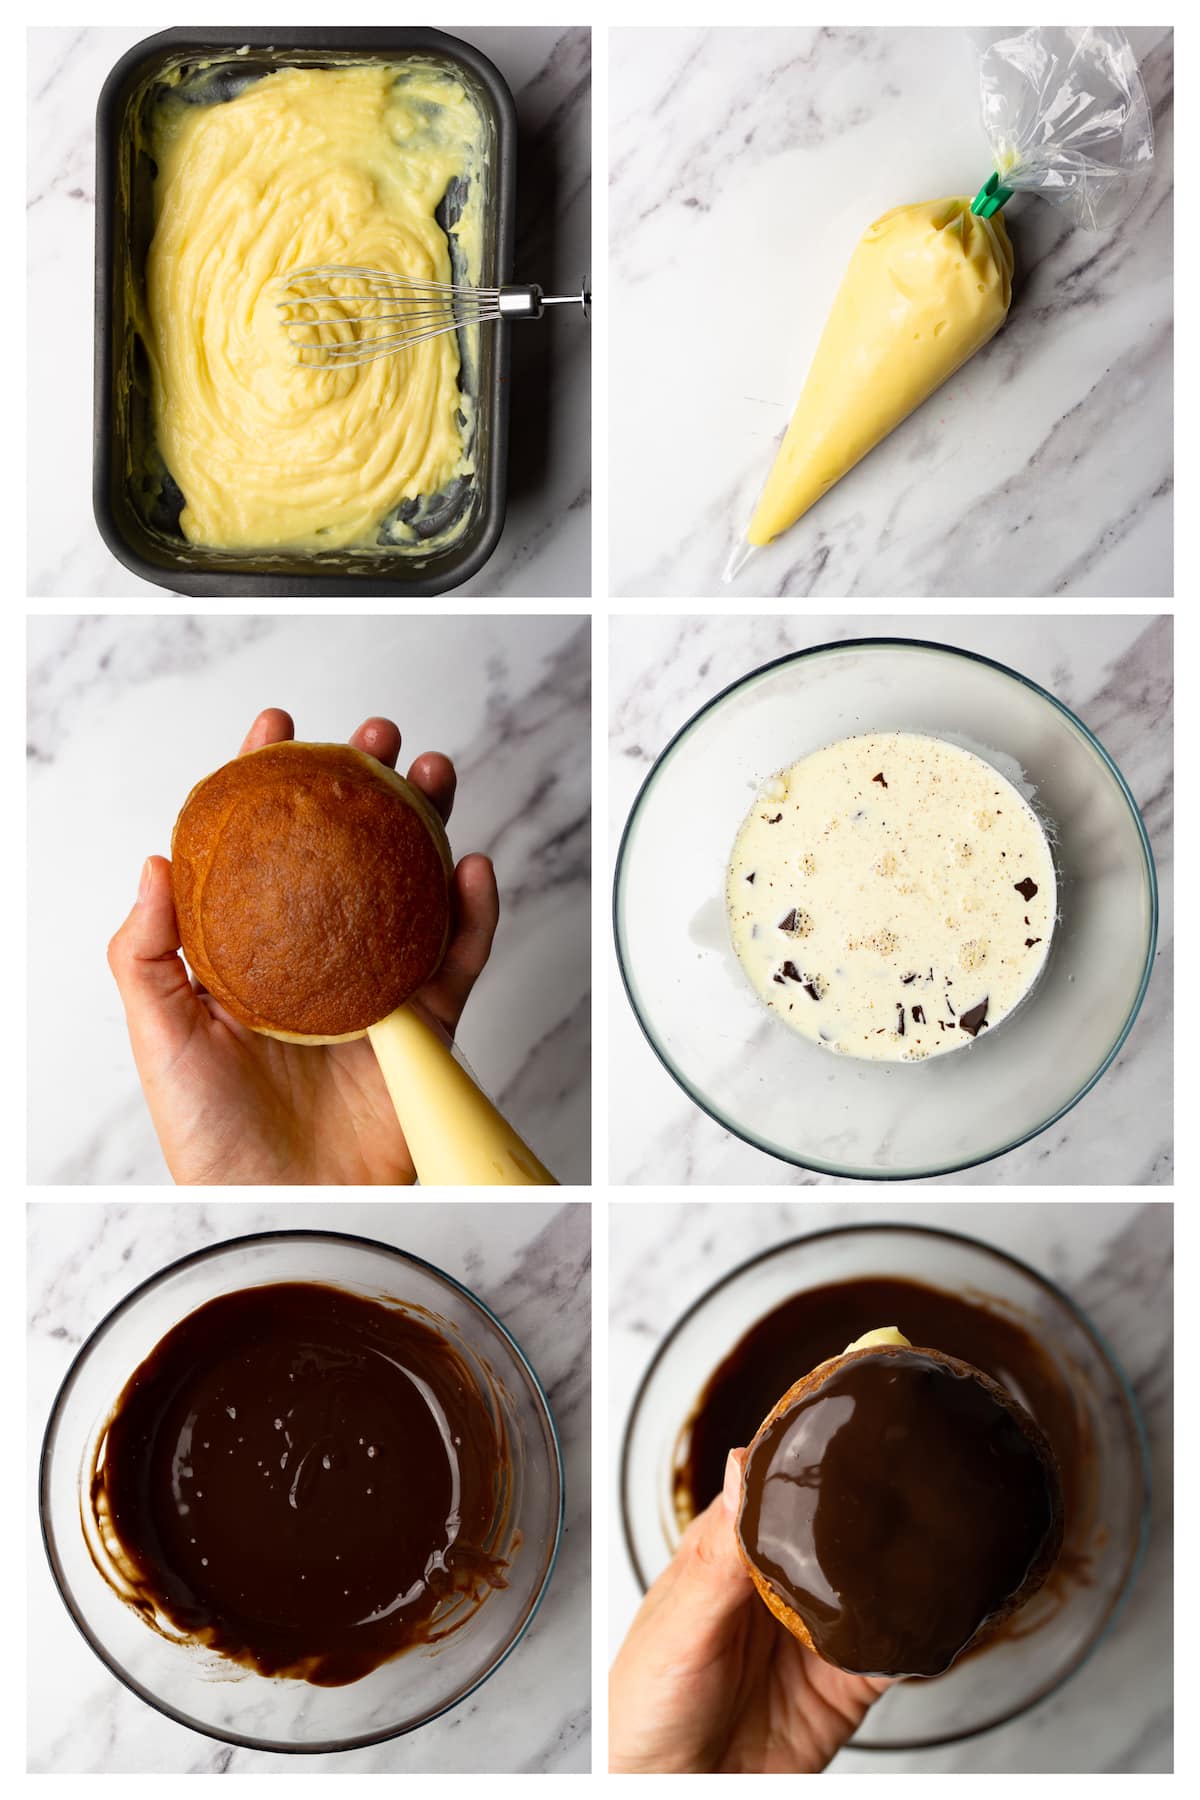 Collage image showing six steps to fill Boston donuts with pastry cream and glaze them with chocolate ganache.